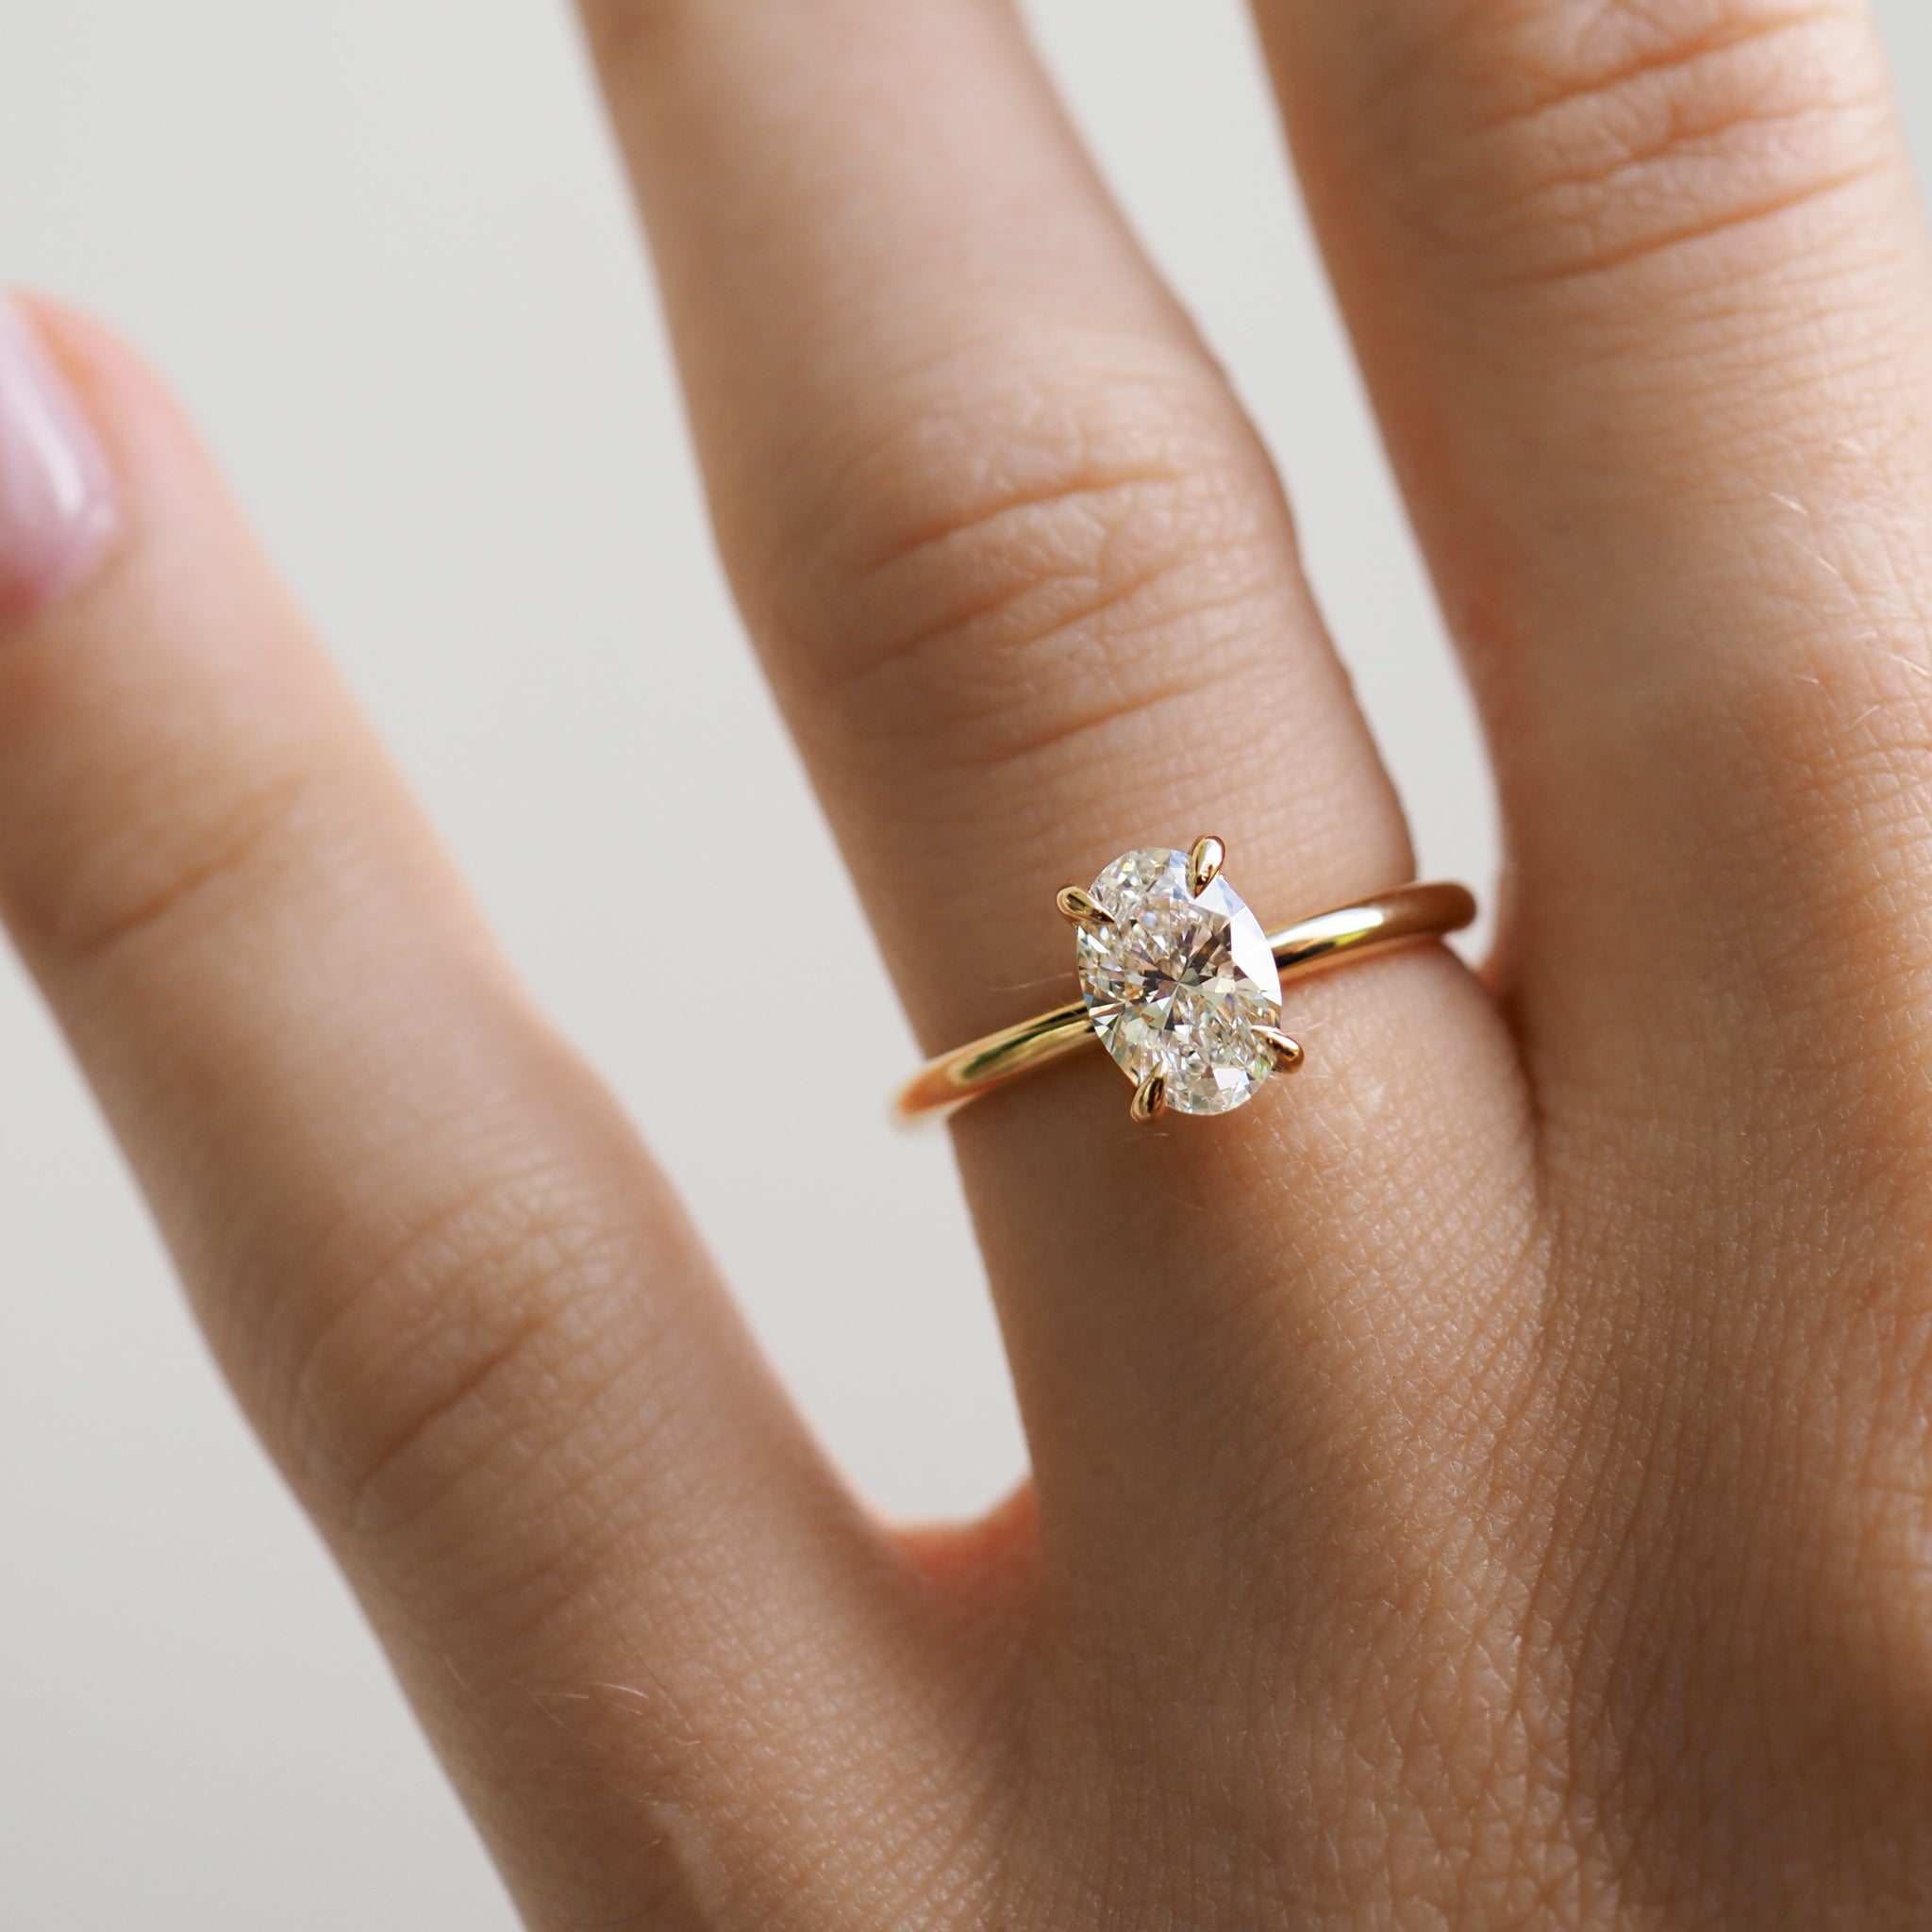 Clara | 1.02ct Oval Diamond Engagement Ring Ready To Wear